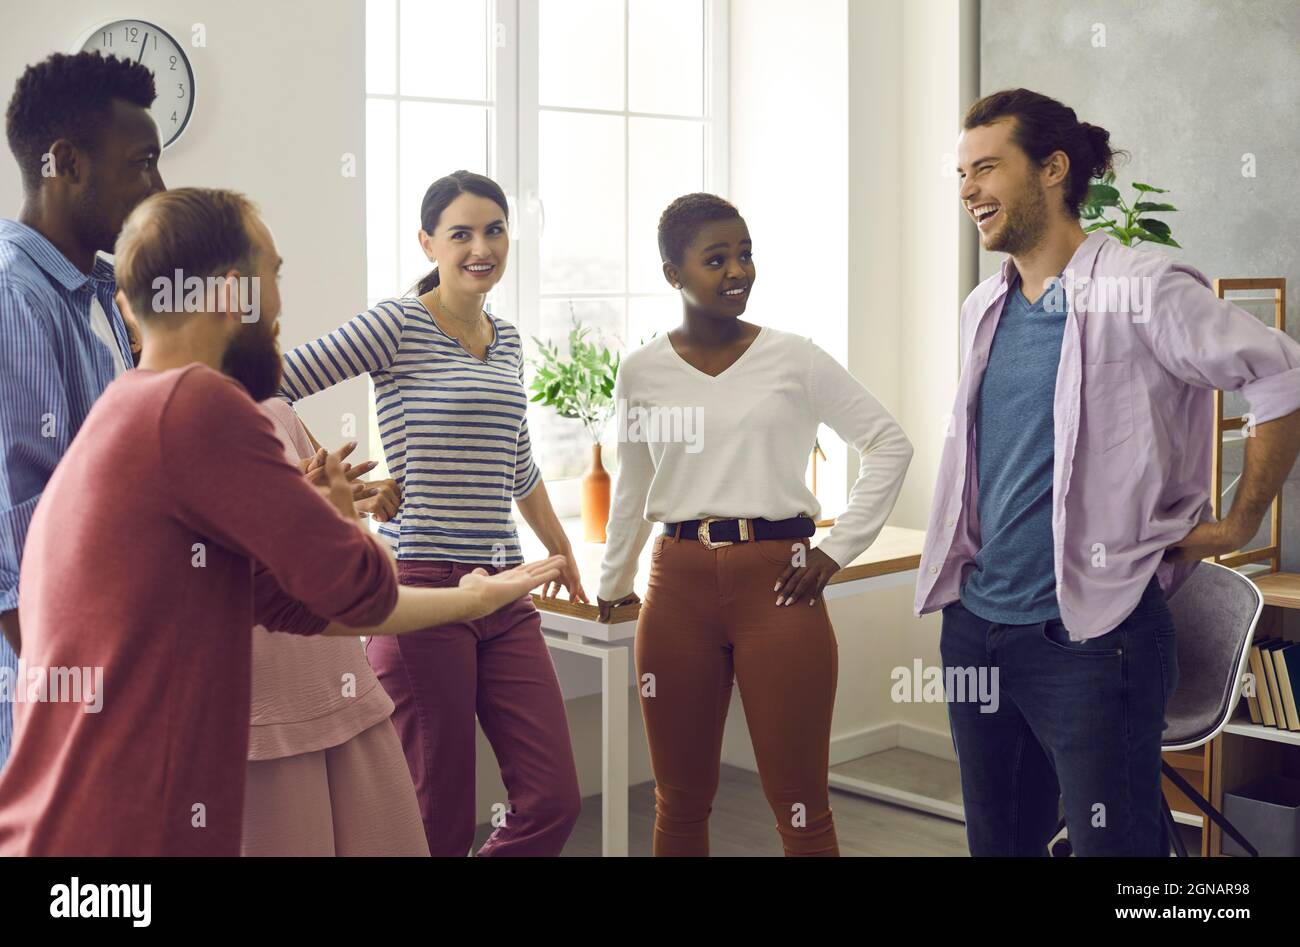 Company of cheerful young multinational friends communicate by telling funny stories. Stock Photo